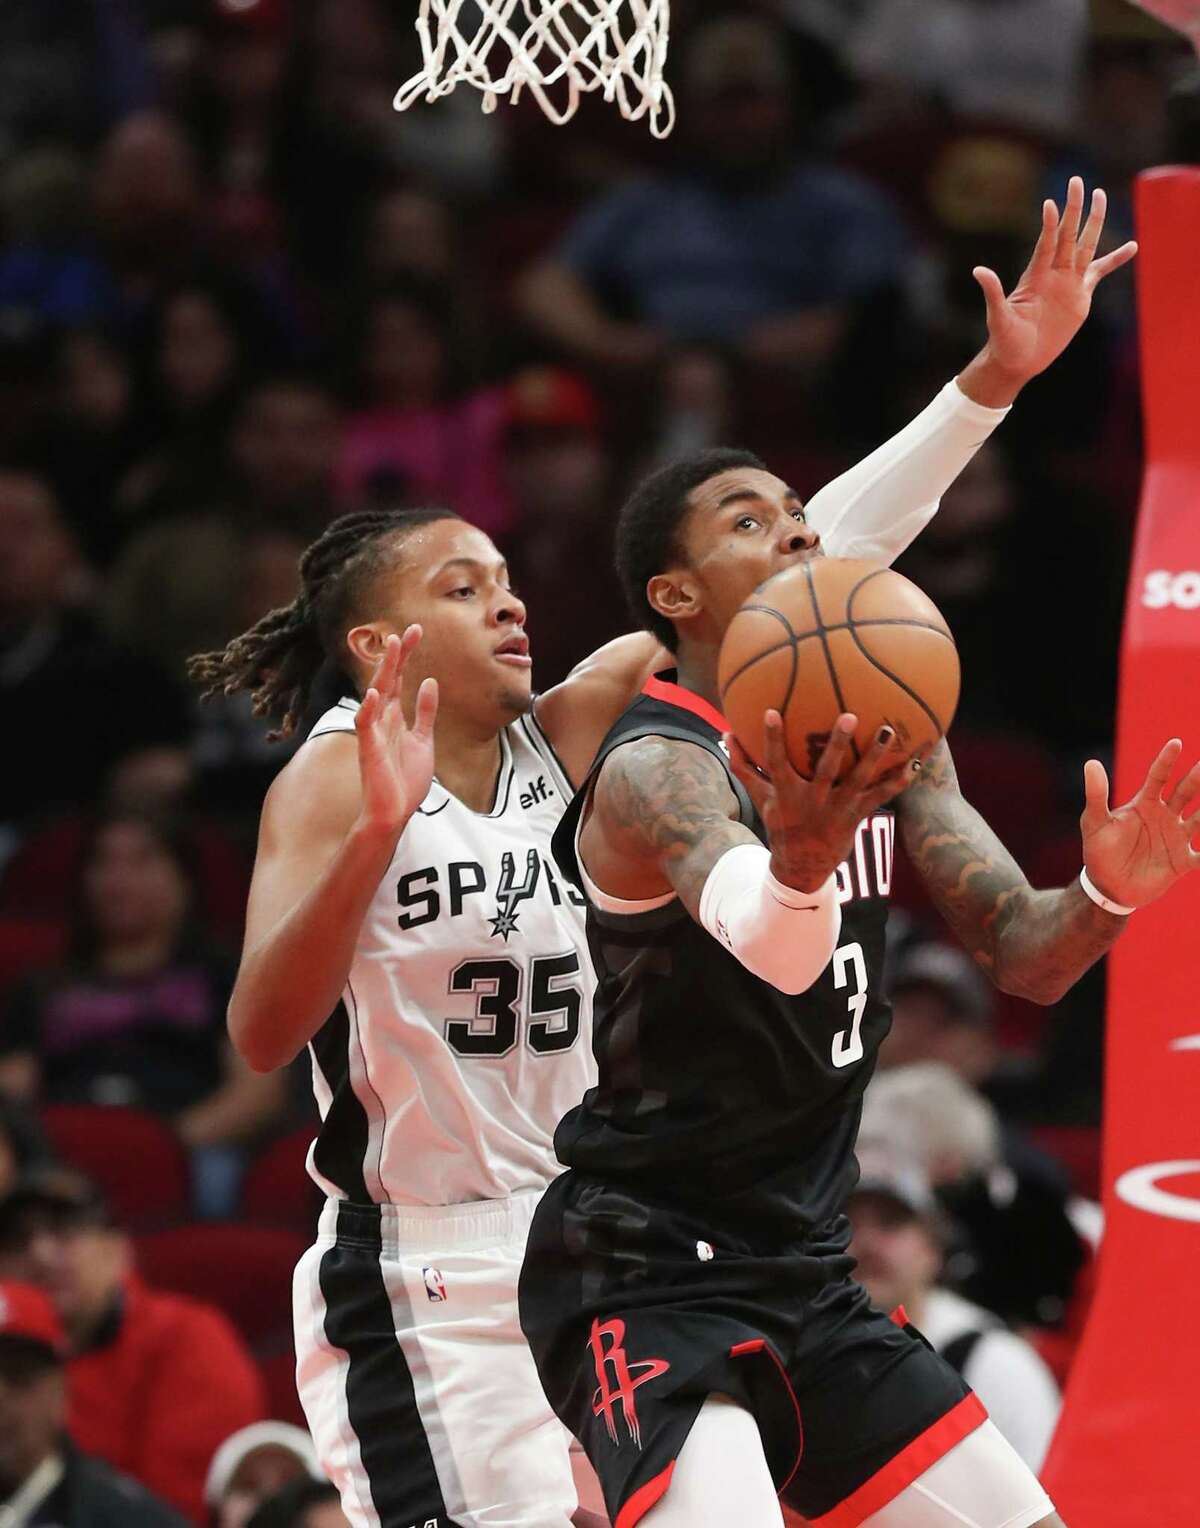 Houston Rockets guard Kevin Porter Jr. (3) looks to the basket against San Antonio Spurs guard Romeo Langford (35) in the second half at the Toyota Center on Monday, Dec. 19, 2022 in Houston. San Antonio Spurs won the game 124-105.